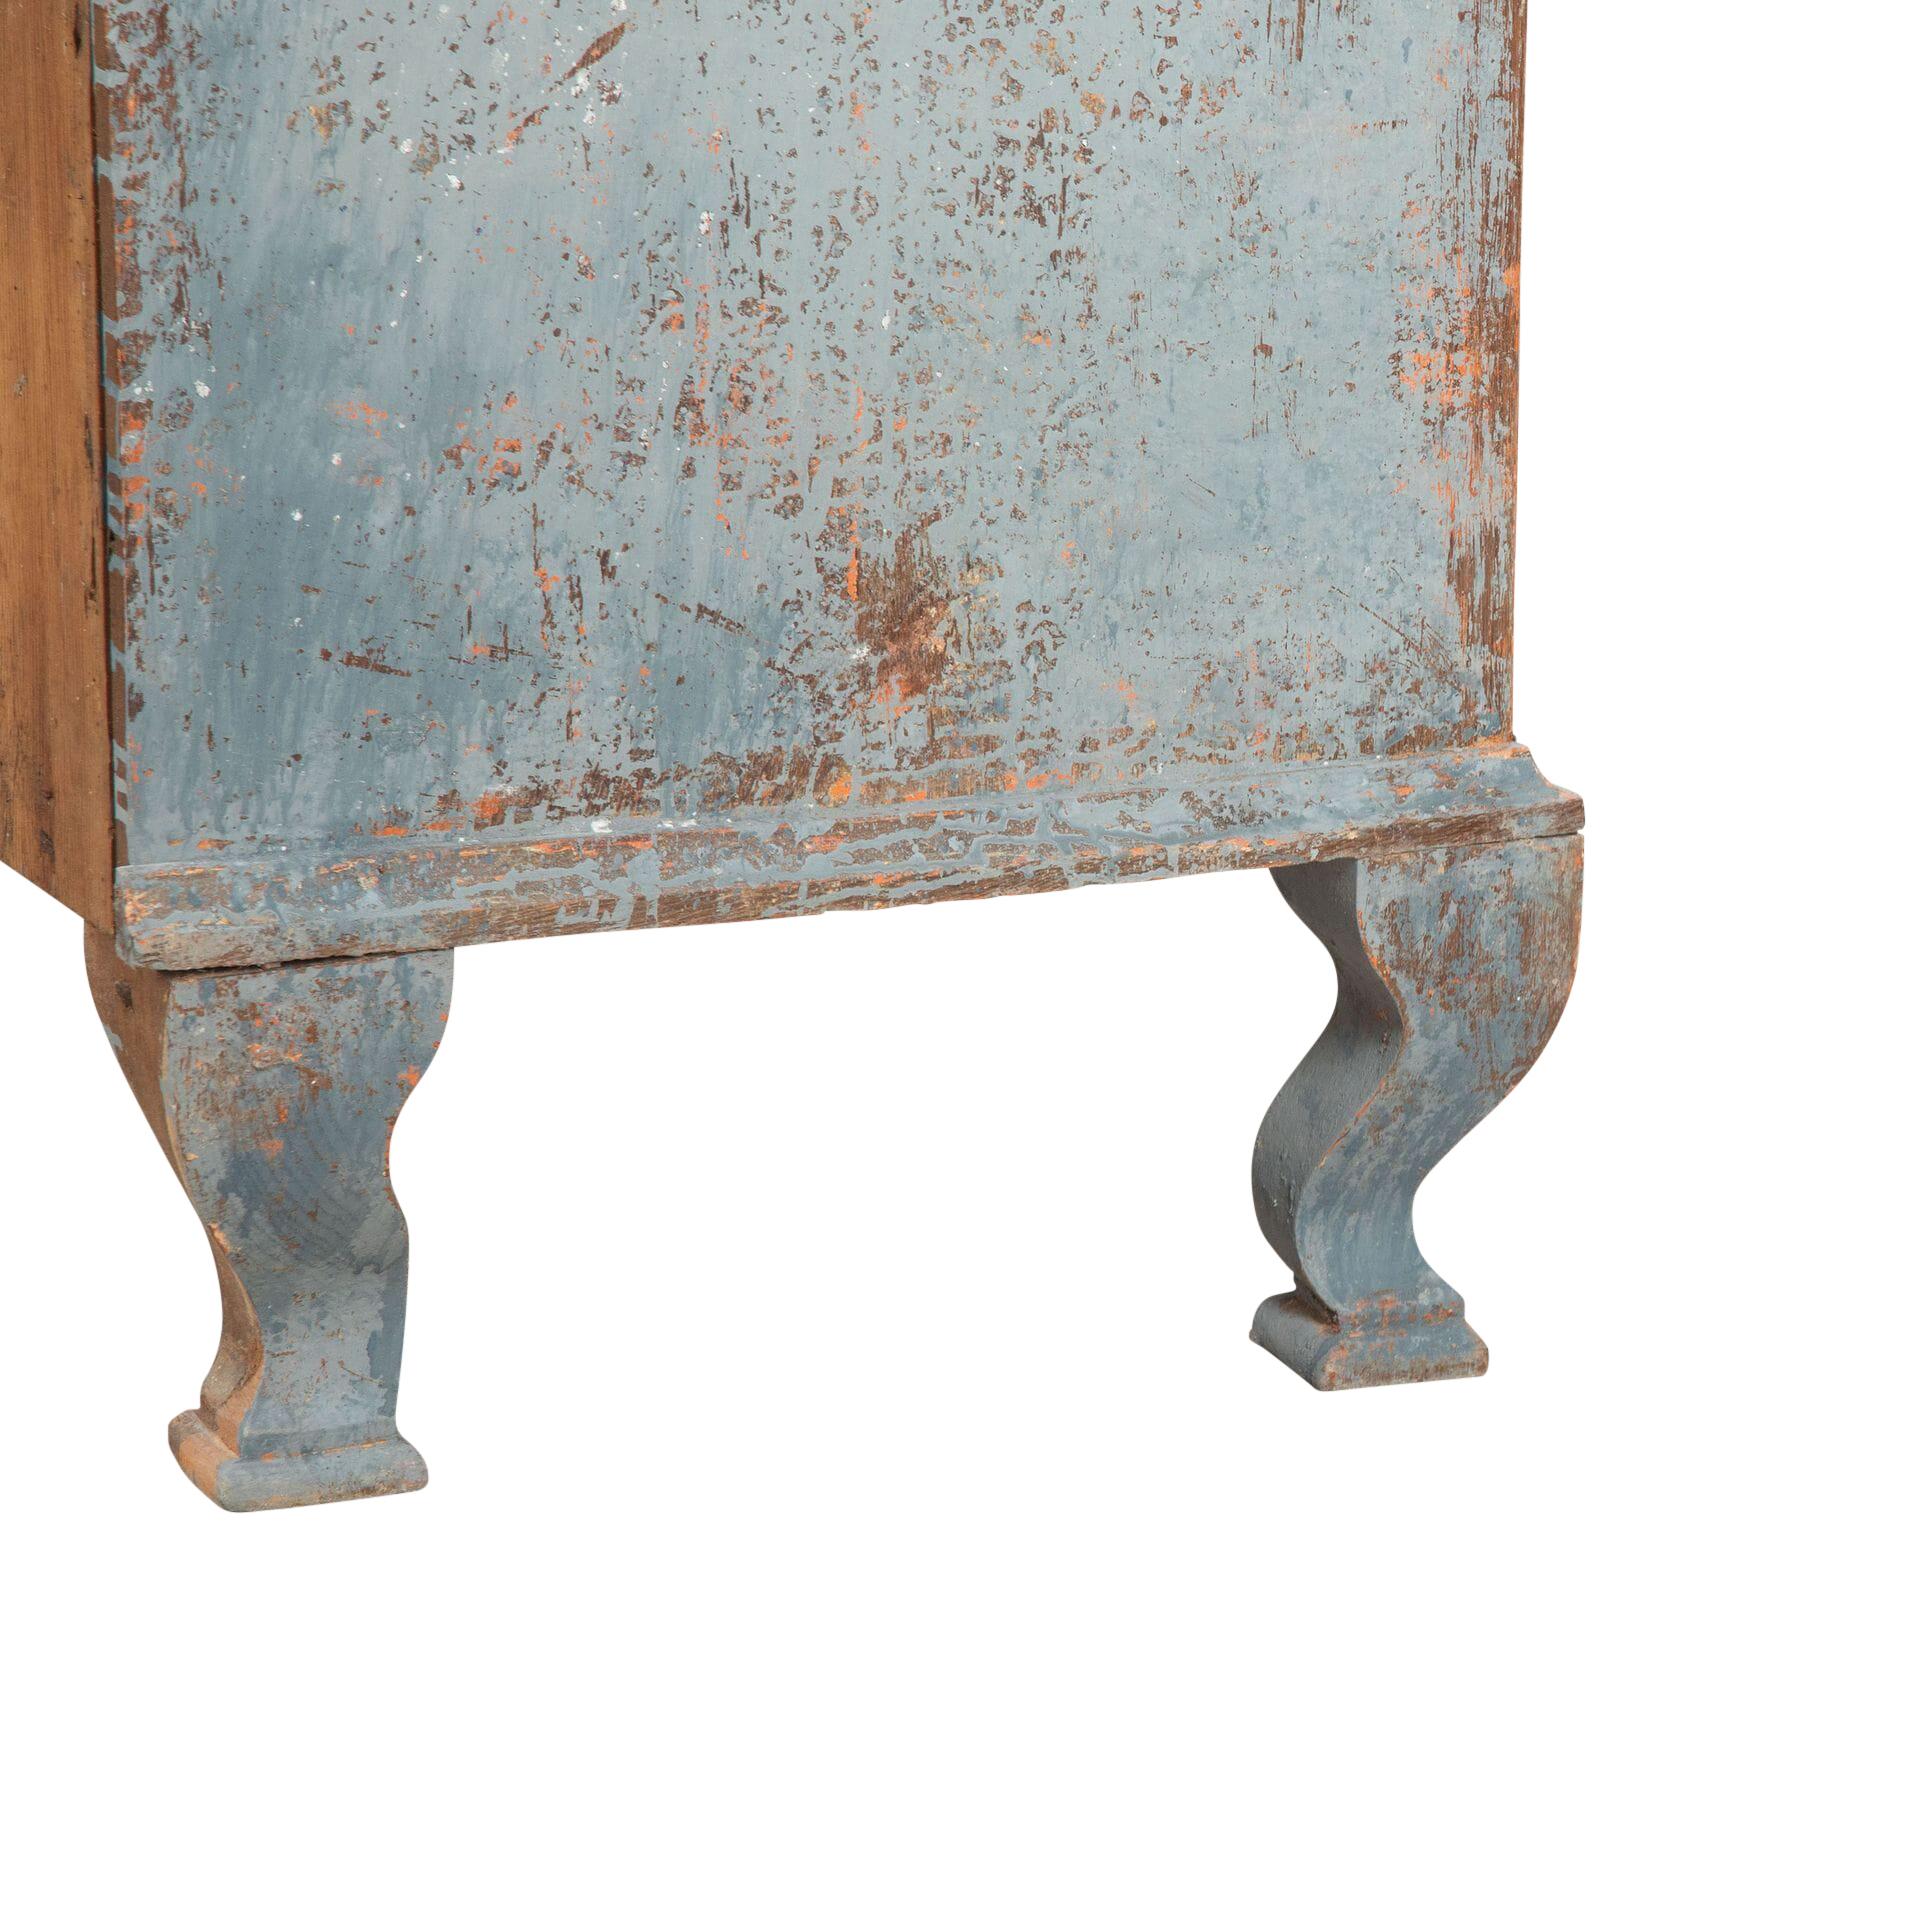 18th Century Swedish Rococo commode with soft serpentine front.
Three drawers open to storage.
Repainted in soft blue.